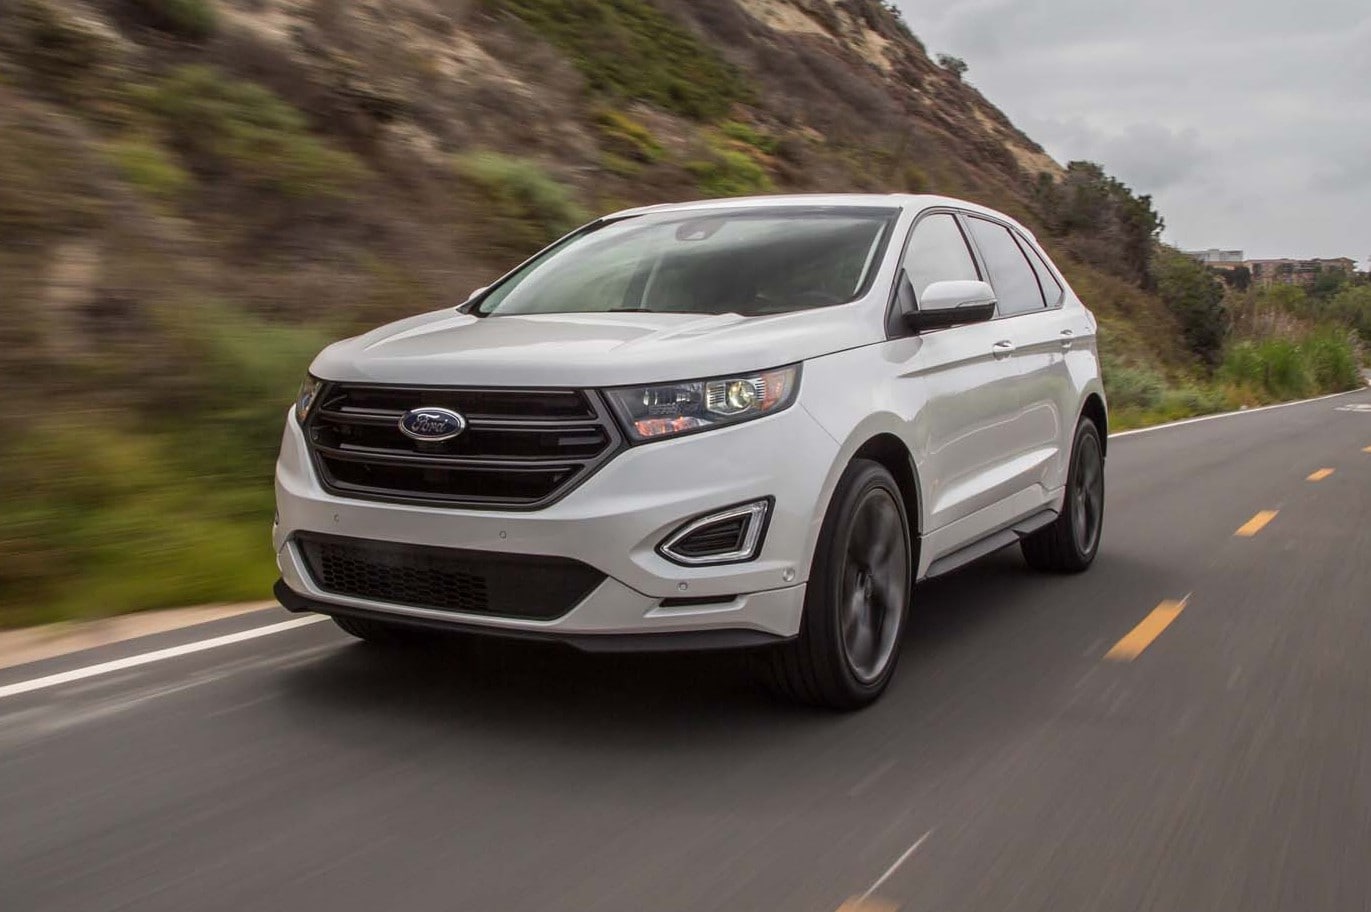 2016 Ford Edge Sport AWD First Test: Now With Adaptive Steering